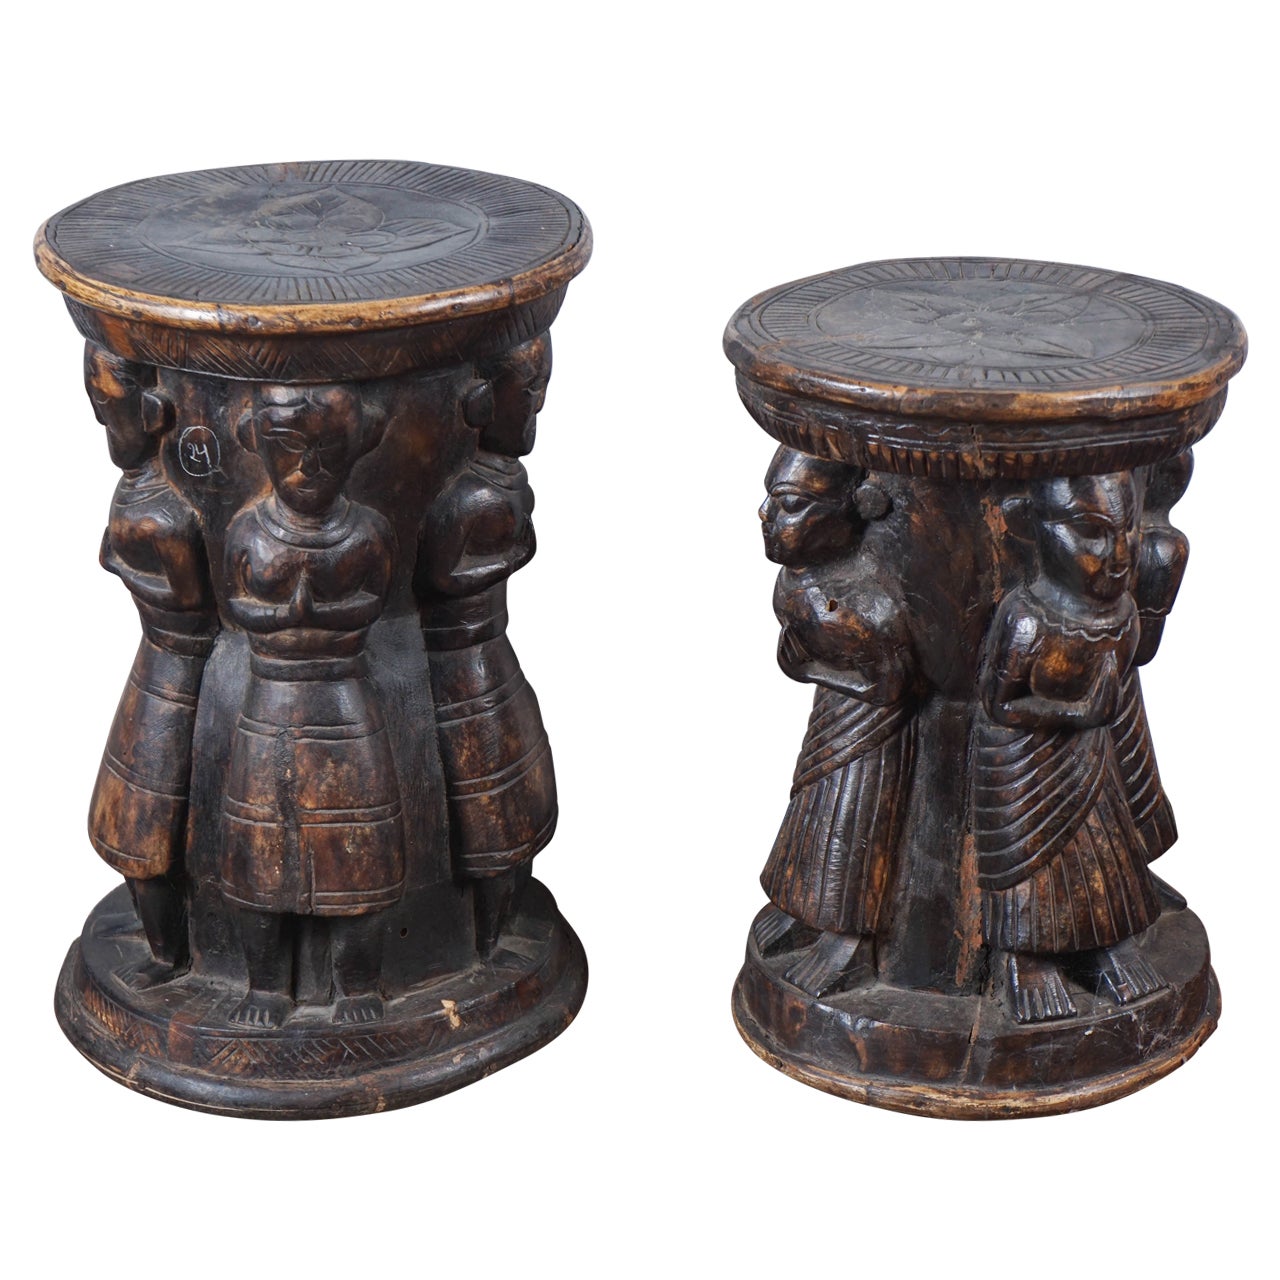 Pair of 19th Century Hand-Carved Stools, Nepal